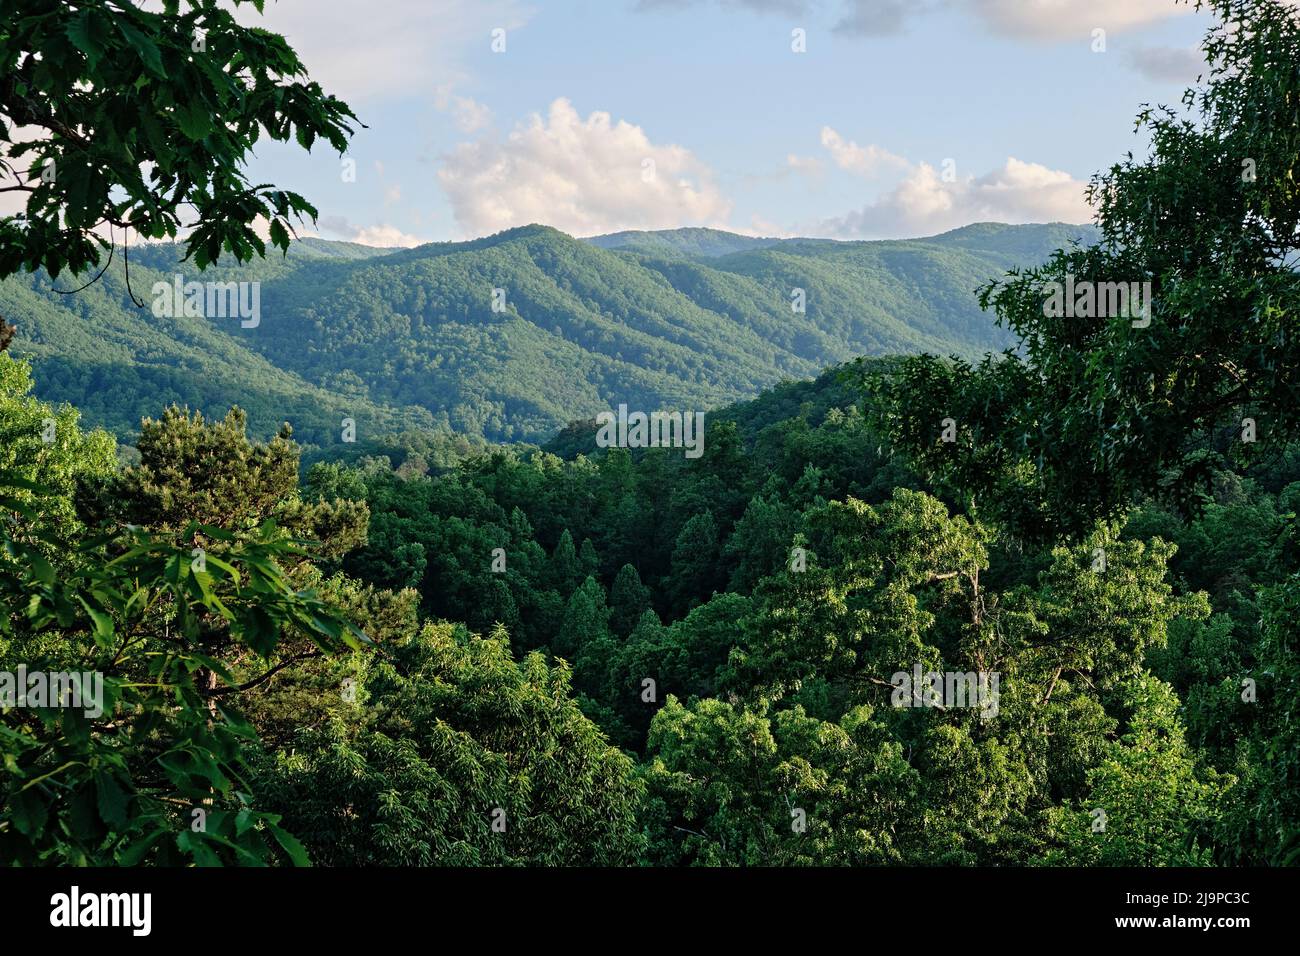 Great Smokey Mountains National Park near Pigeon Forge and Gatlinburg Tennessee, USA. Stock Photo